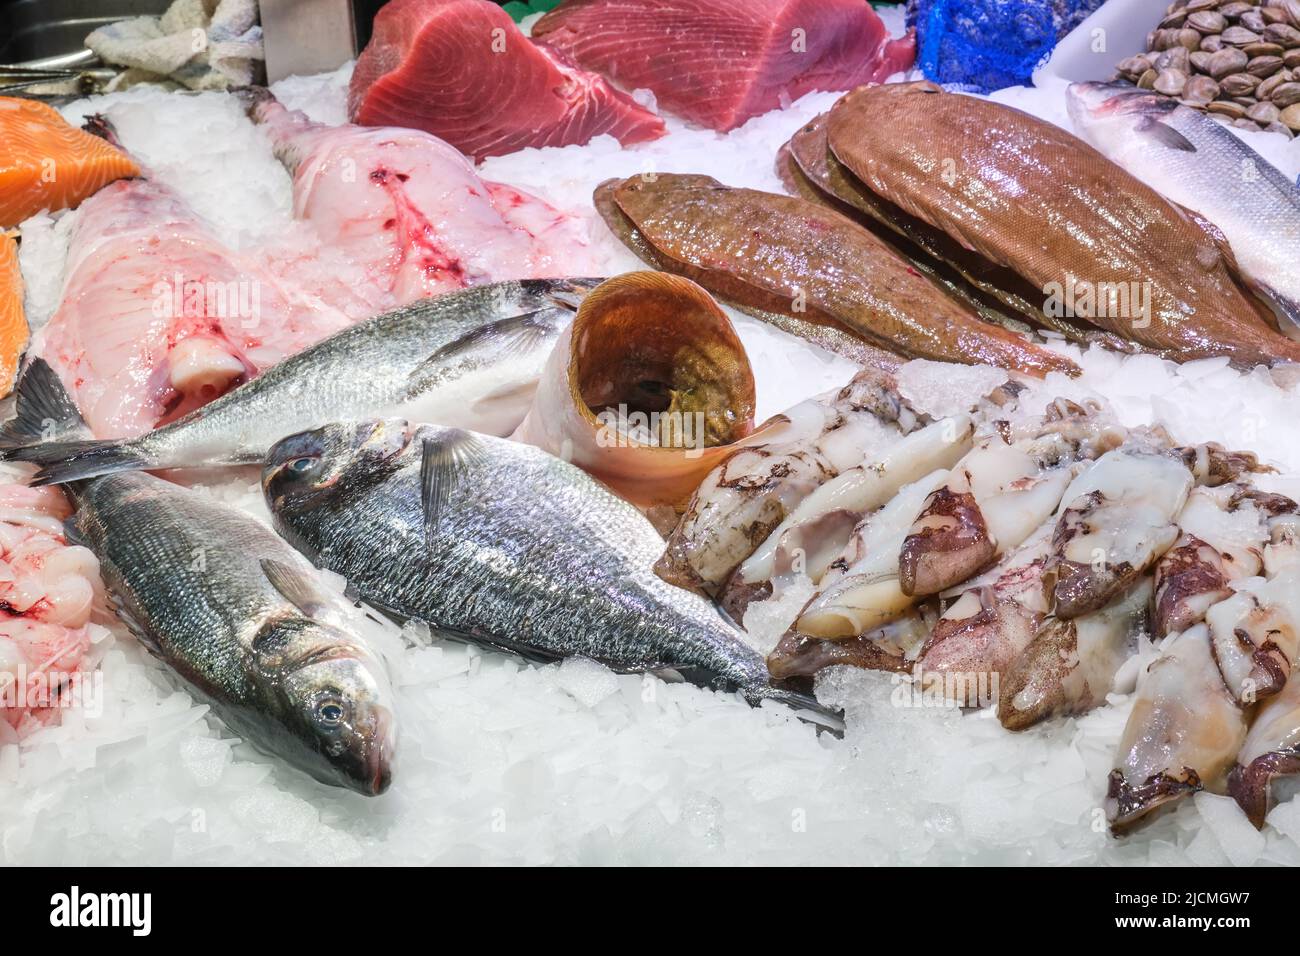 Market stall with fish and seafood seen in Barcelona Stock Photo